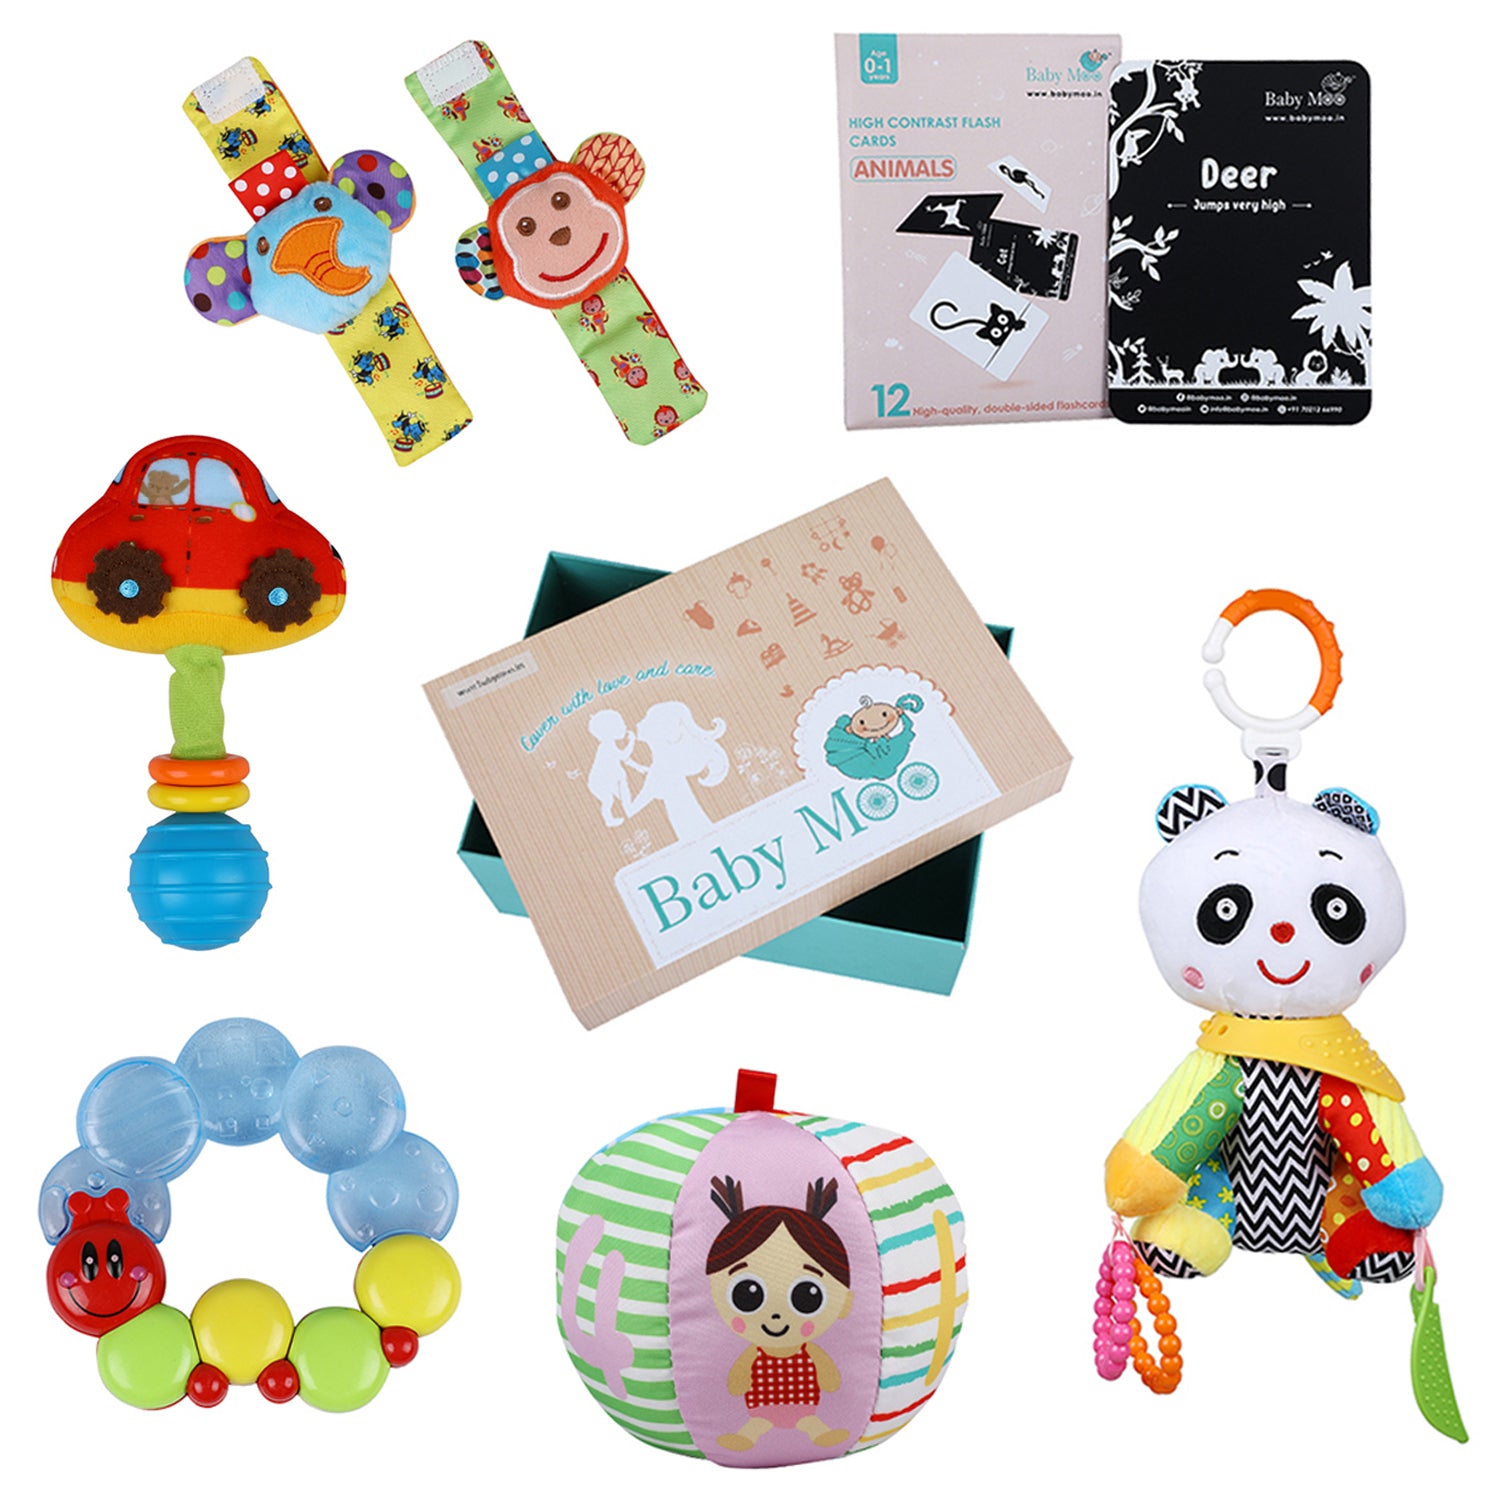 Newborn Play Kit With High Contrast Cards, Toy Rattles And Teethers 6 Items 0-12M - Multicolour